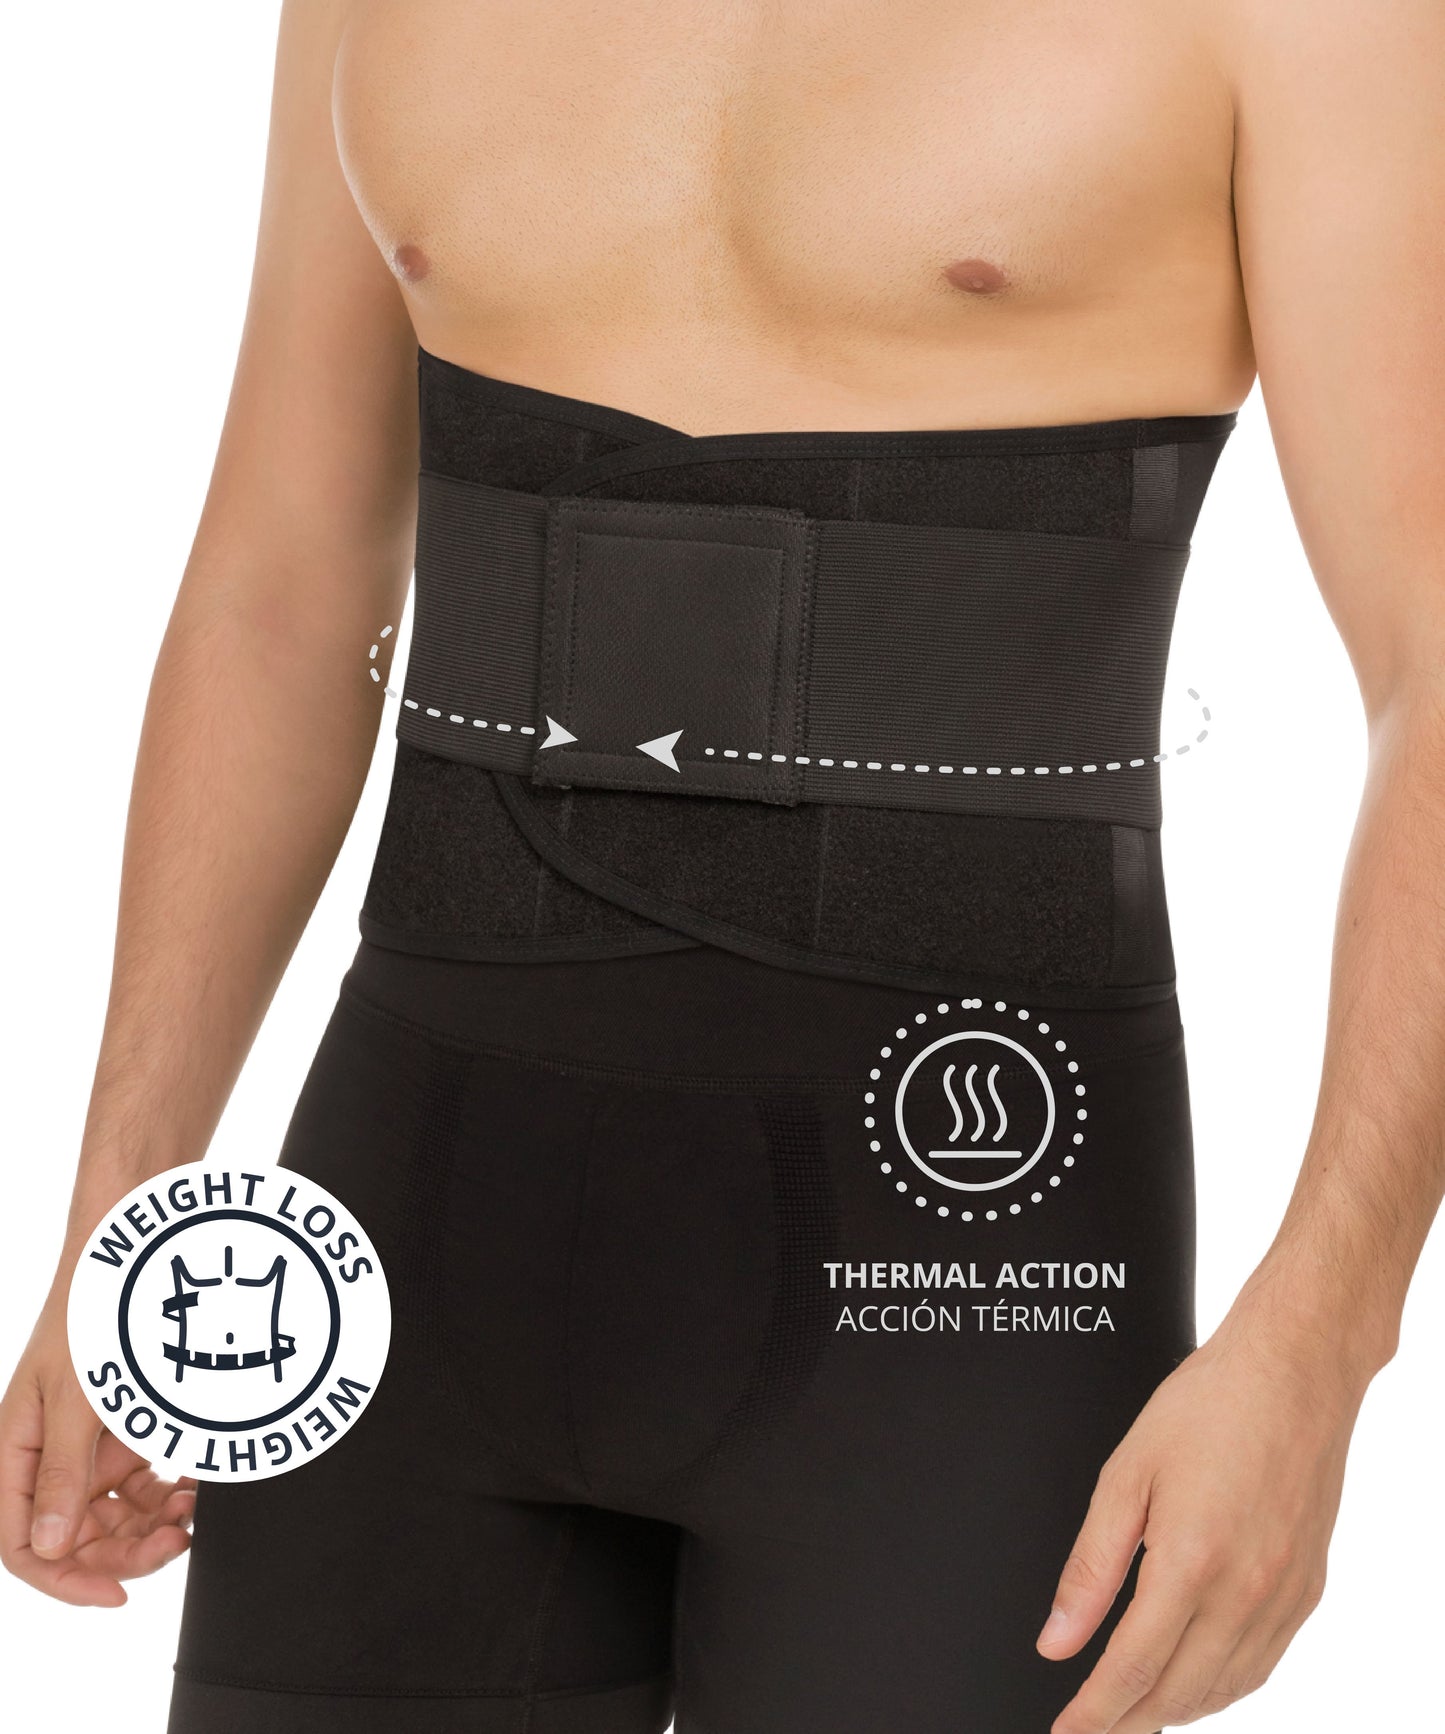 Men’s Support and Sweat Enhancing Waistband 8017